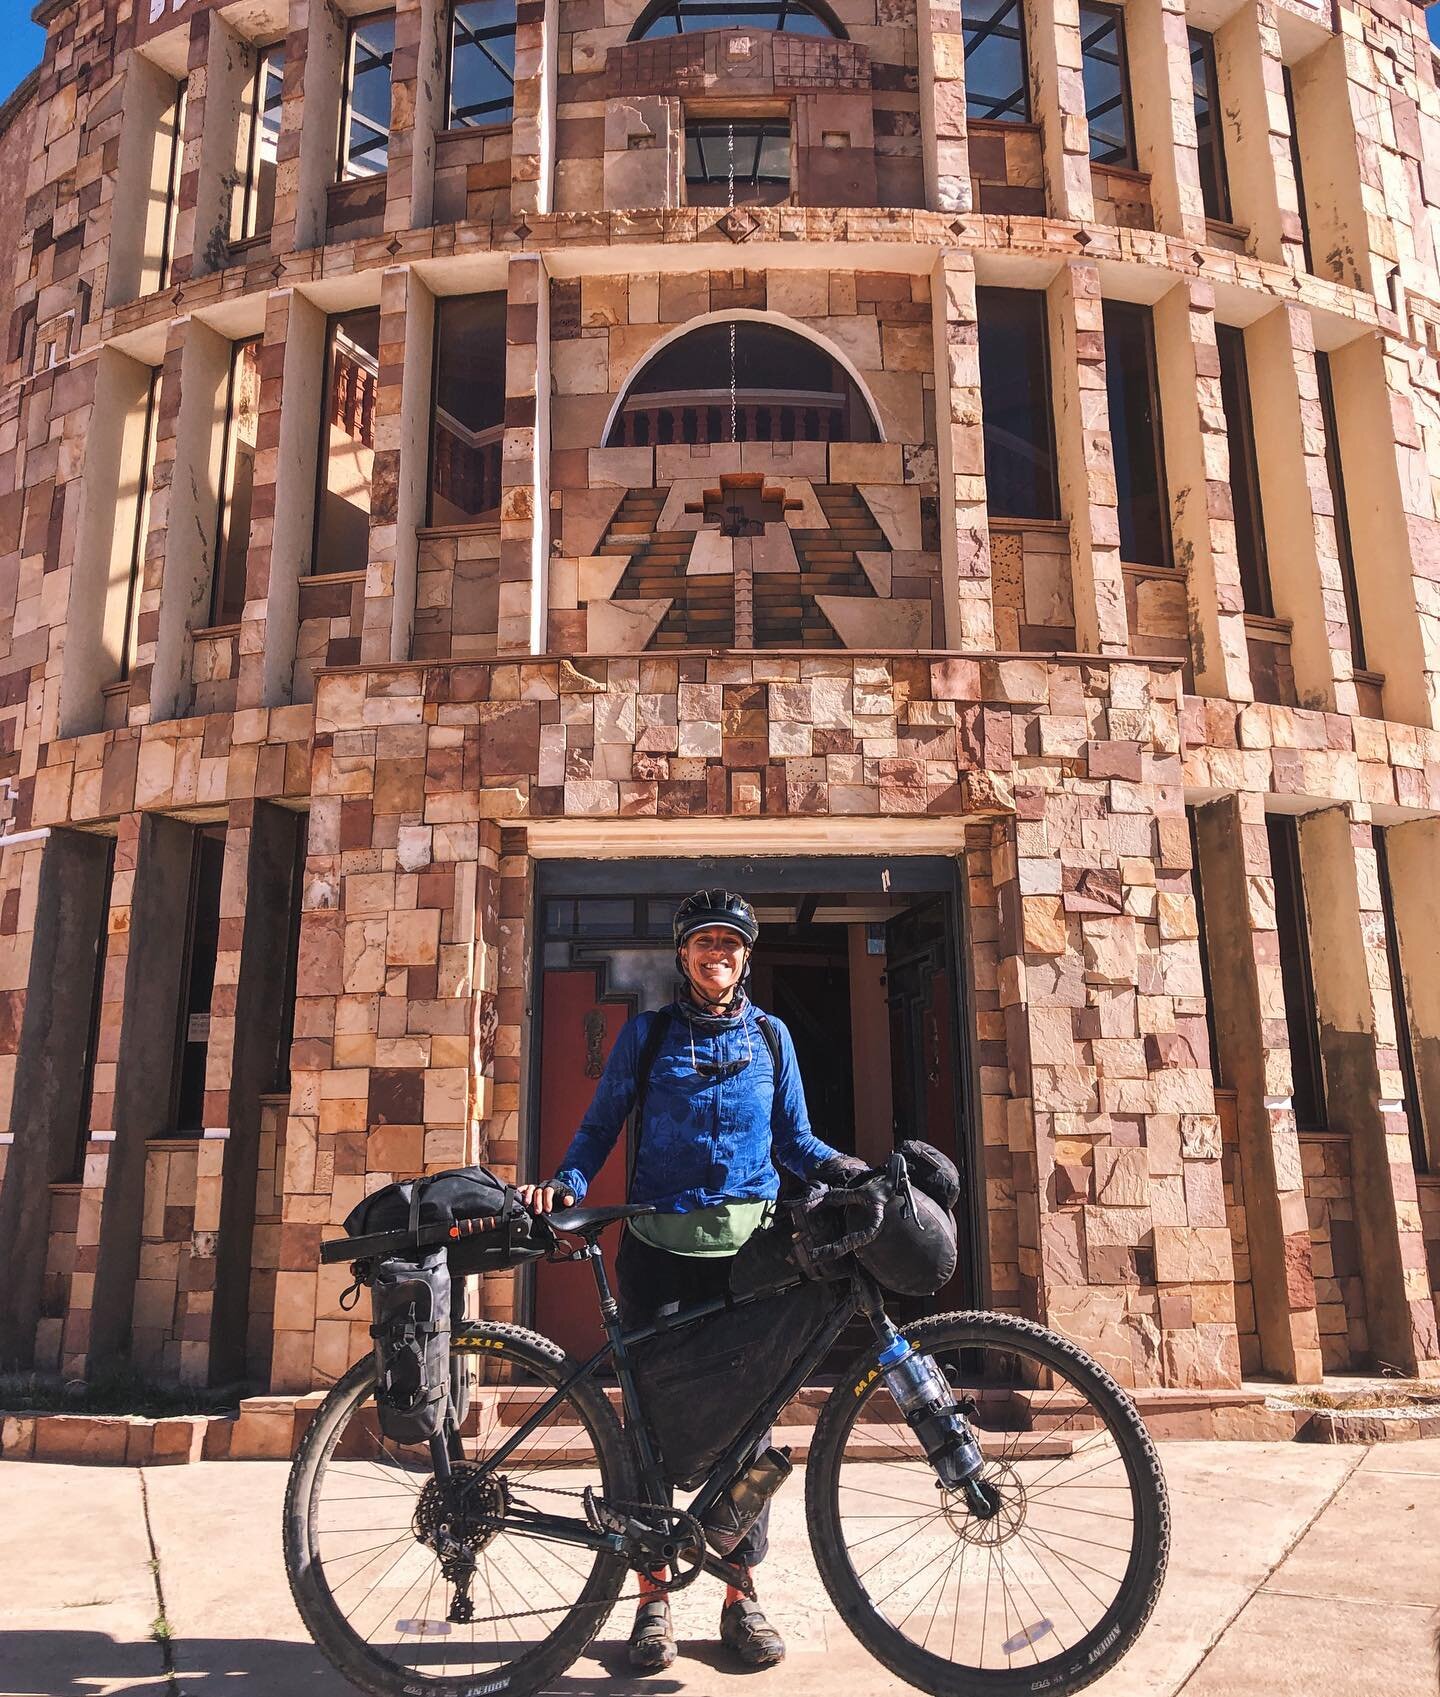 The final day cycling in Bolivia 🇧🇴 spent amongst the ancient city of Tiwanaku at almost 13,000 feet in the Lake Titicaca Basin. 

Biking at high altitude has taken some adjusting &mdash; especially after a juxtaposing previous tour at sea level in